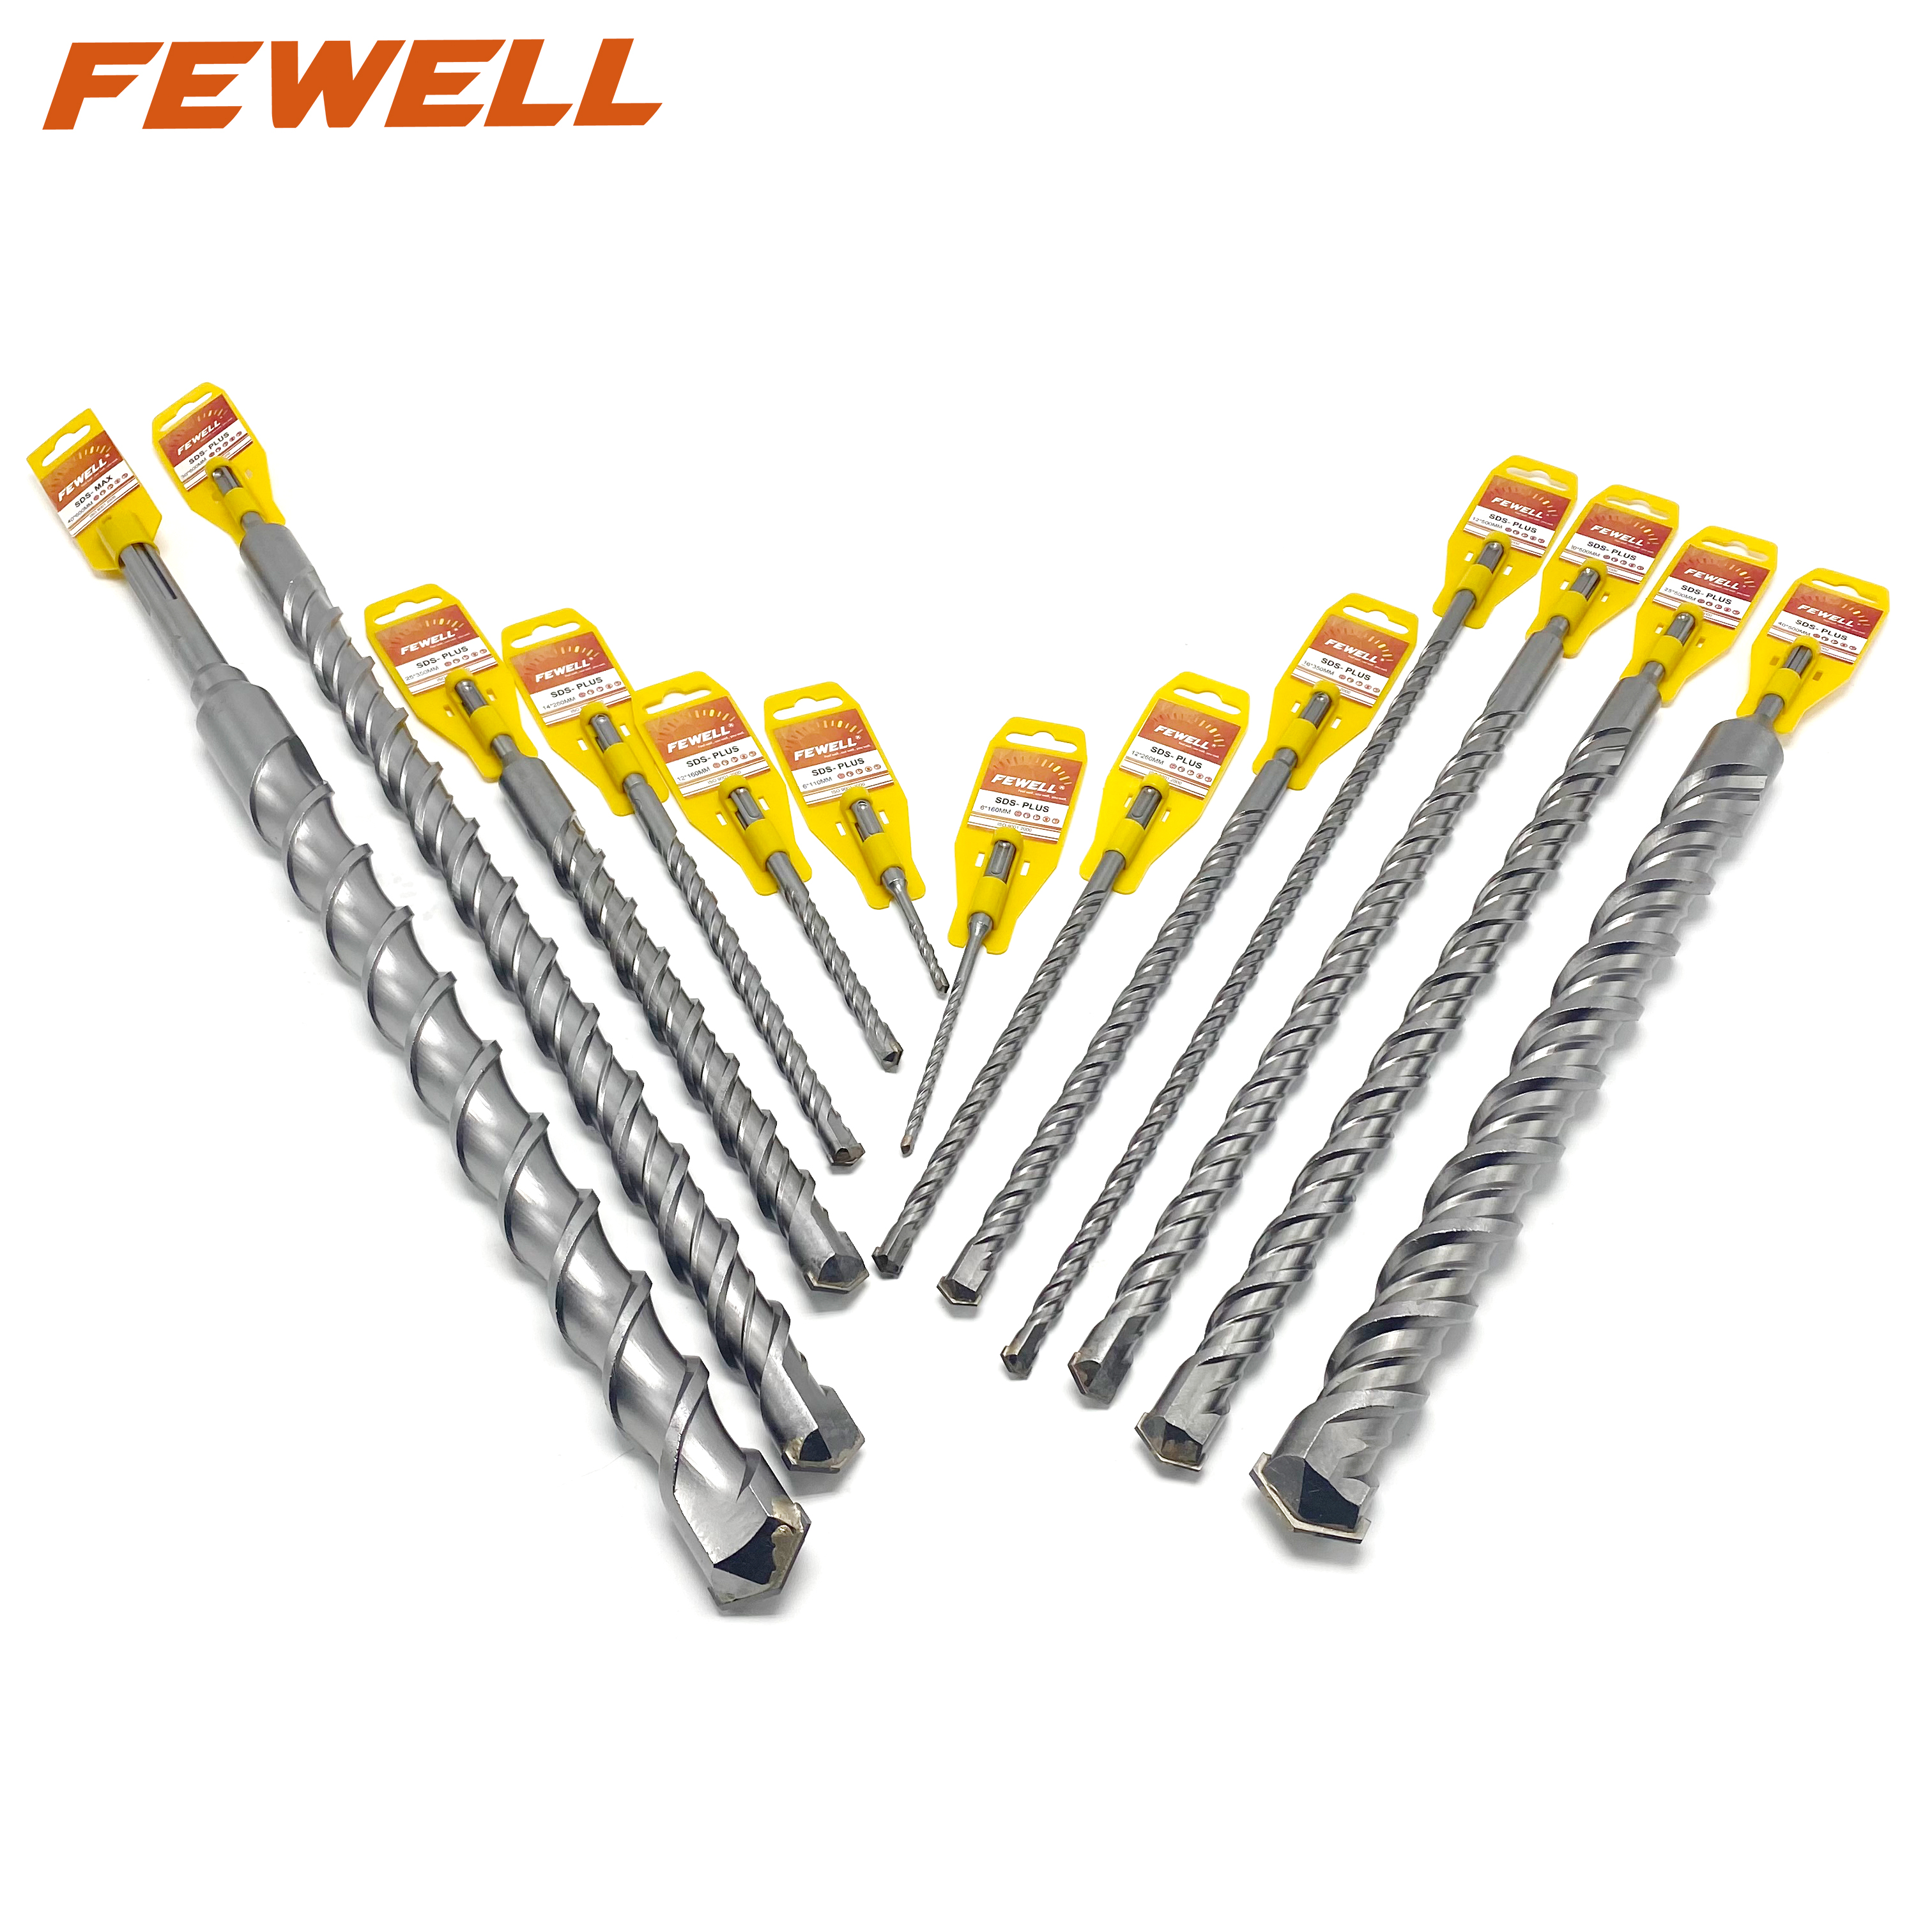 High quality SDS Plus Carbide Single Flat Tip 40*500/600/800/1000mm Double Flute Electric Hammer Drill Bit for Concrete wall Masonry Hard Stone Granite